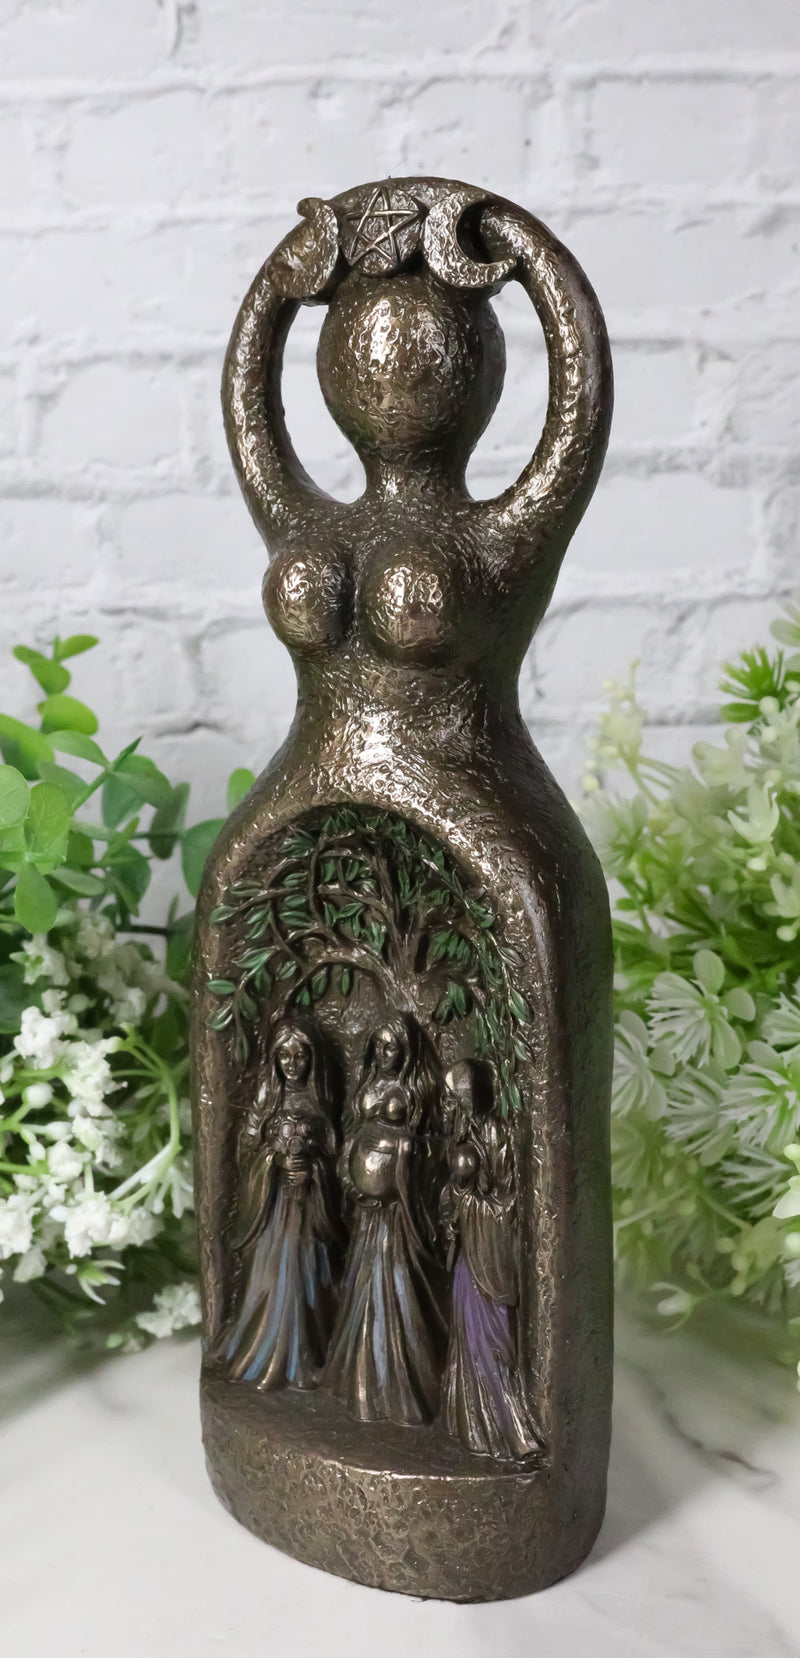 Wicca Spiral Triple Moon Goddess Mother Maiden Crone Tree Of Life Figurine